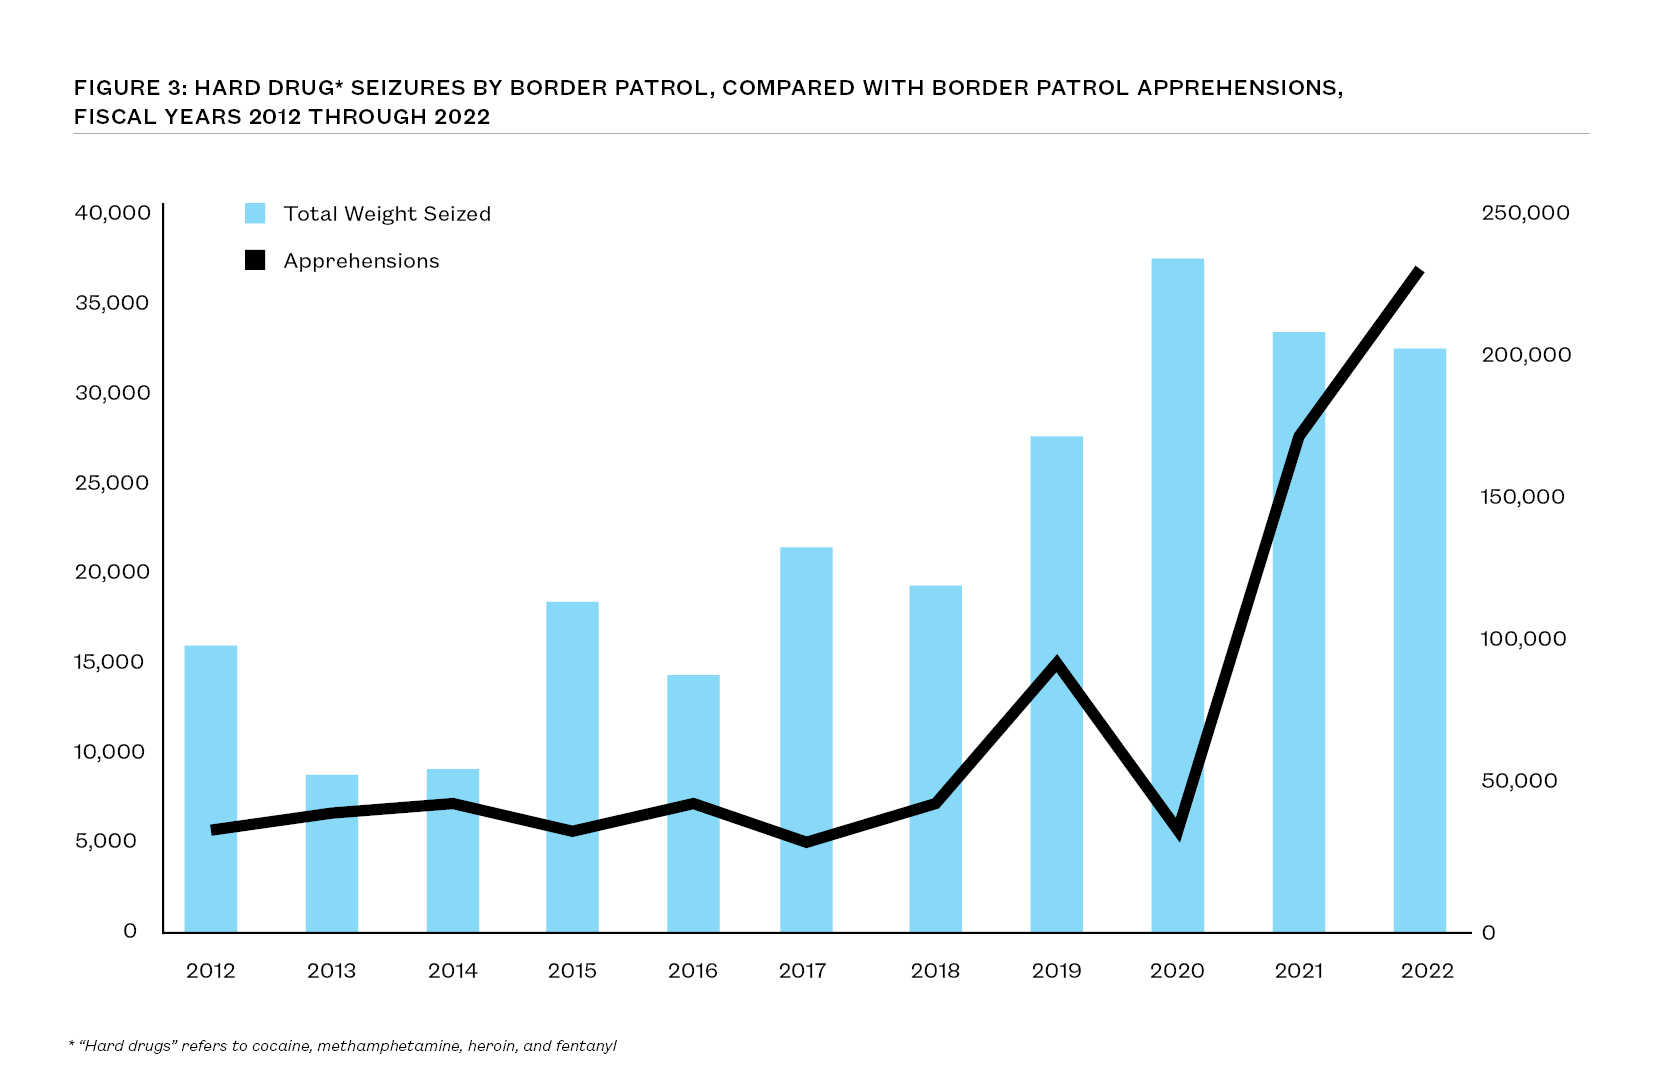 A combo bar and line chart comparing hard drug seizures and apprehensions and no clear correlation between migrant apprehensions and overall hard drug seizure weight